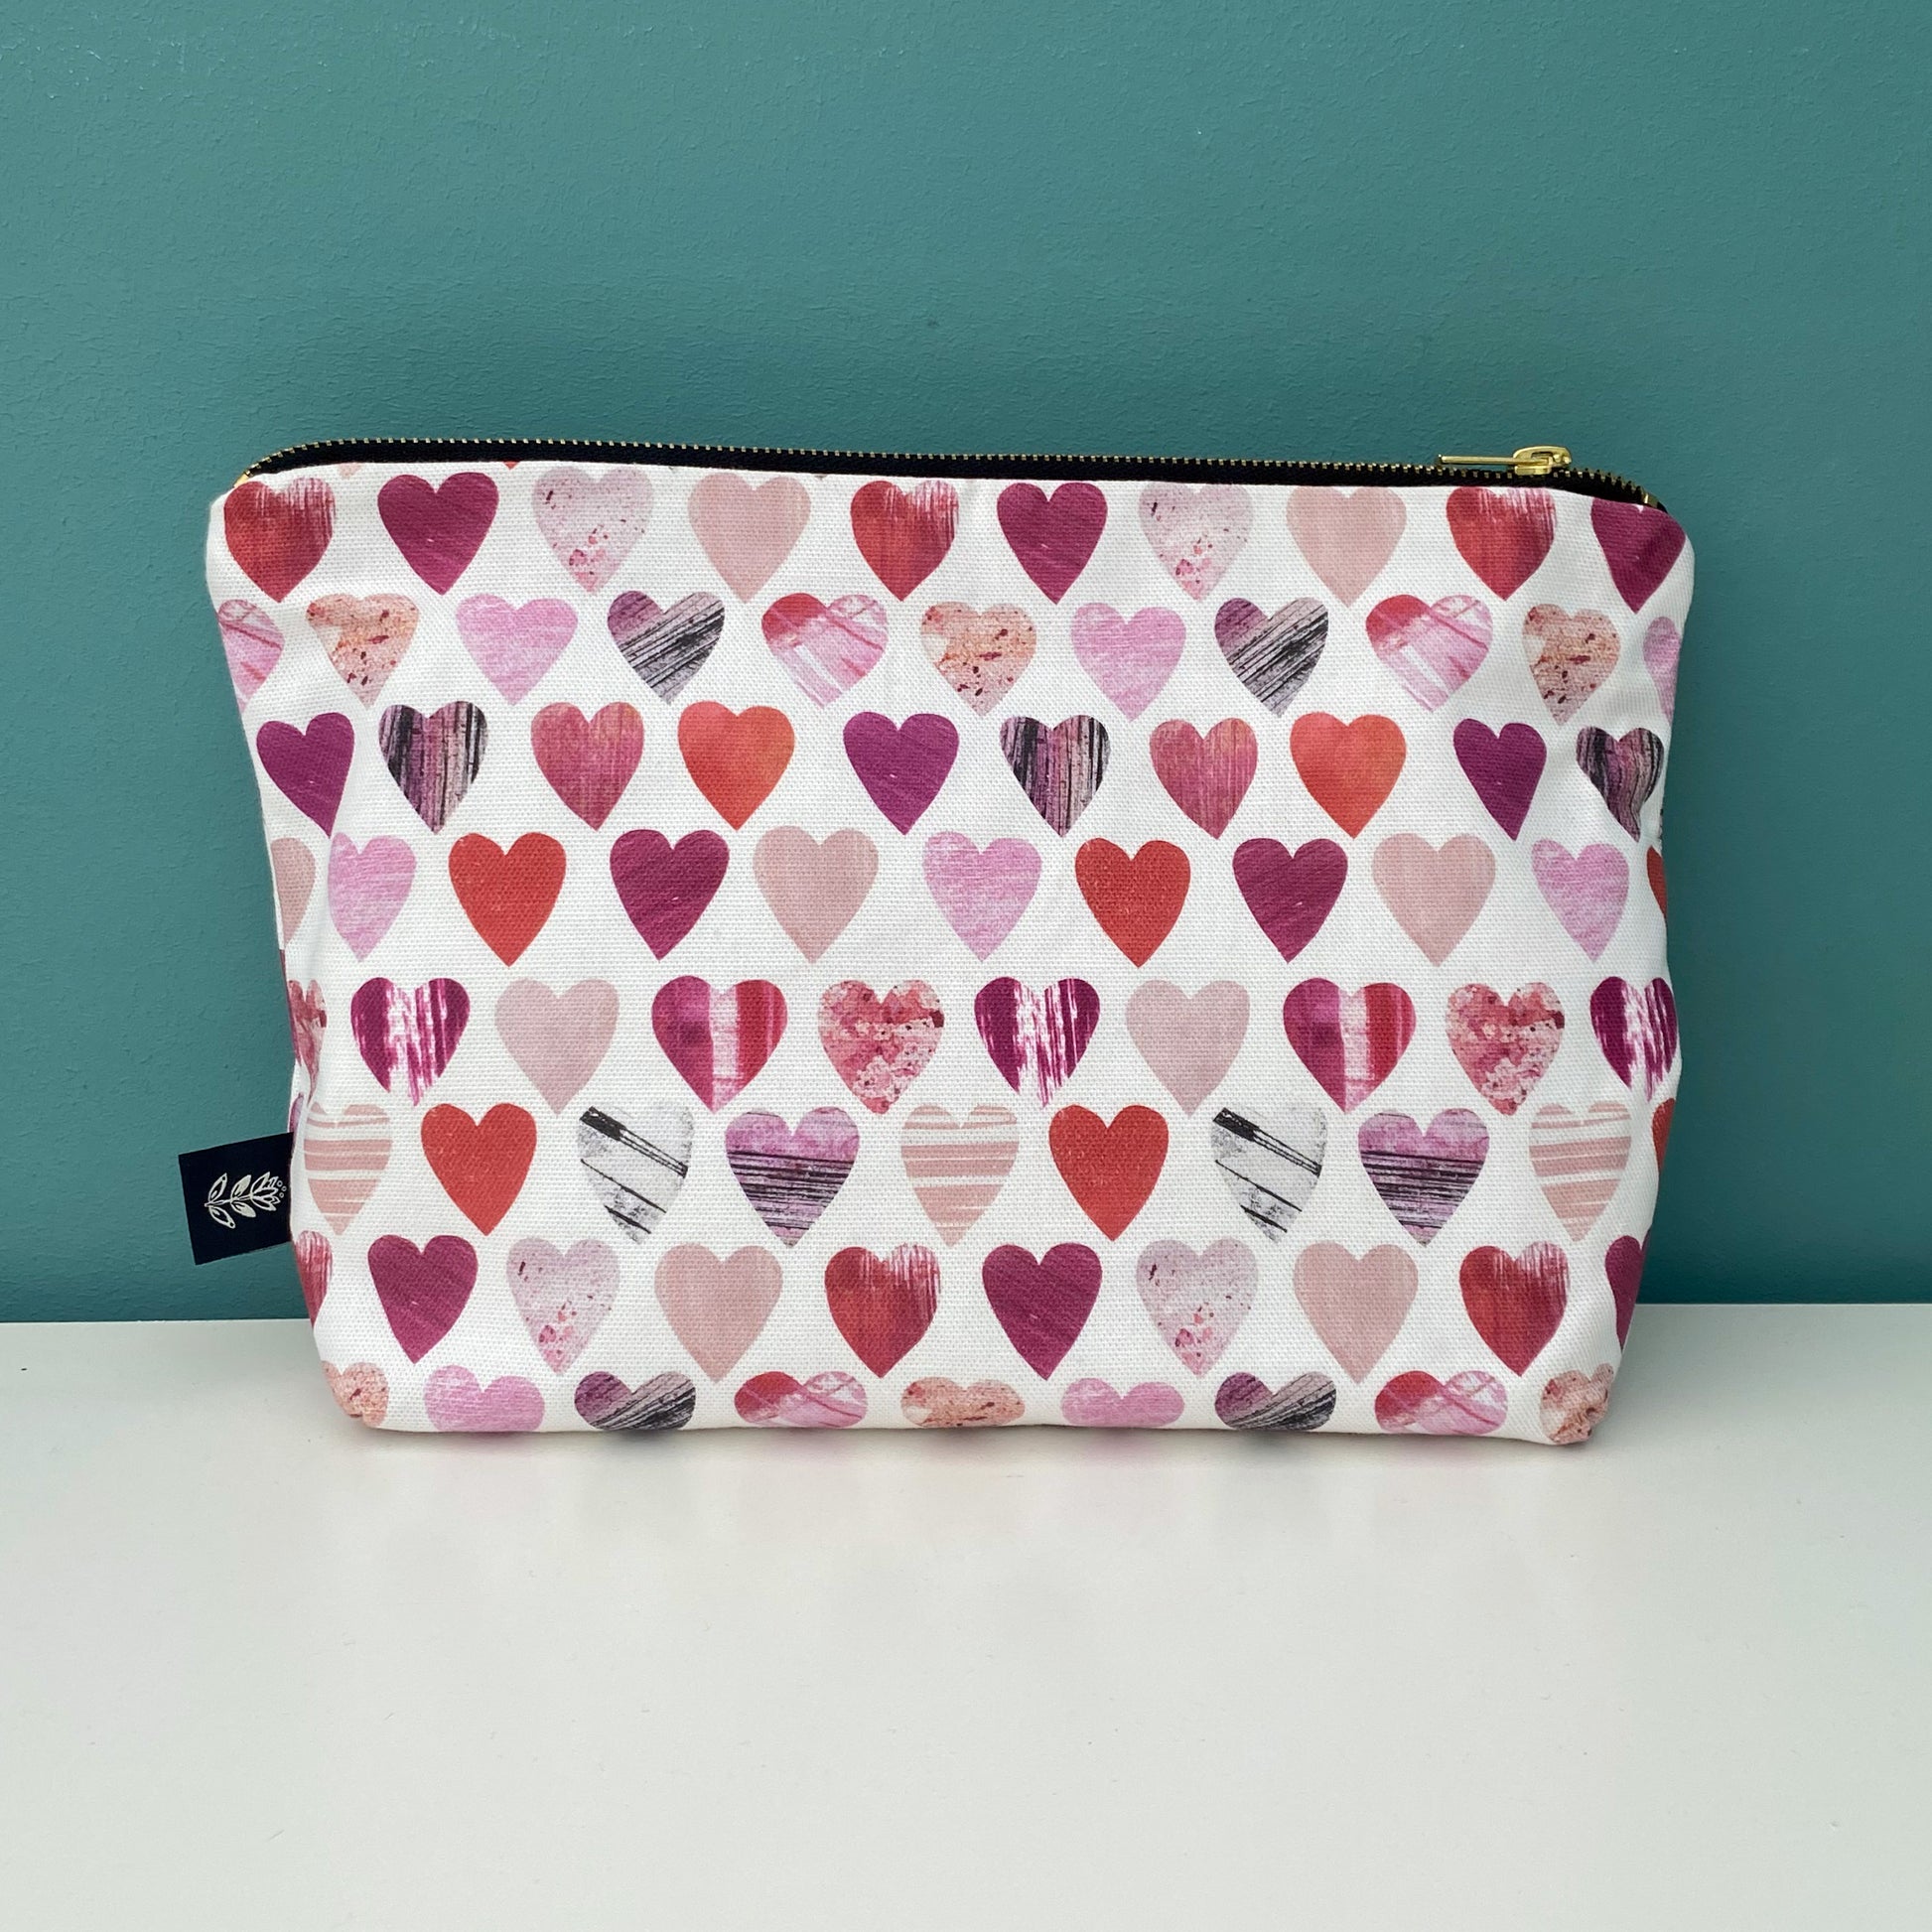 A large Hearts wash bag placed on a white shelf with a blue green background.  The wash bags has a gold metal zipper and a Brand label sewn into the outside seam.